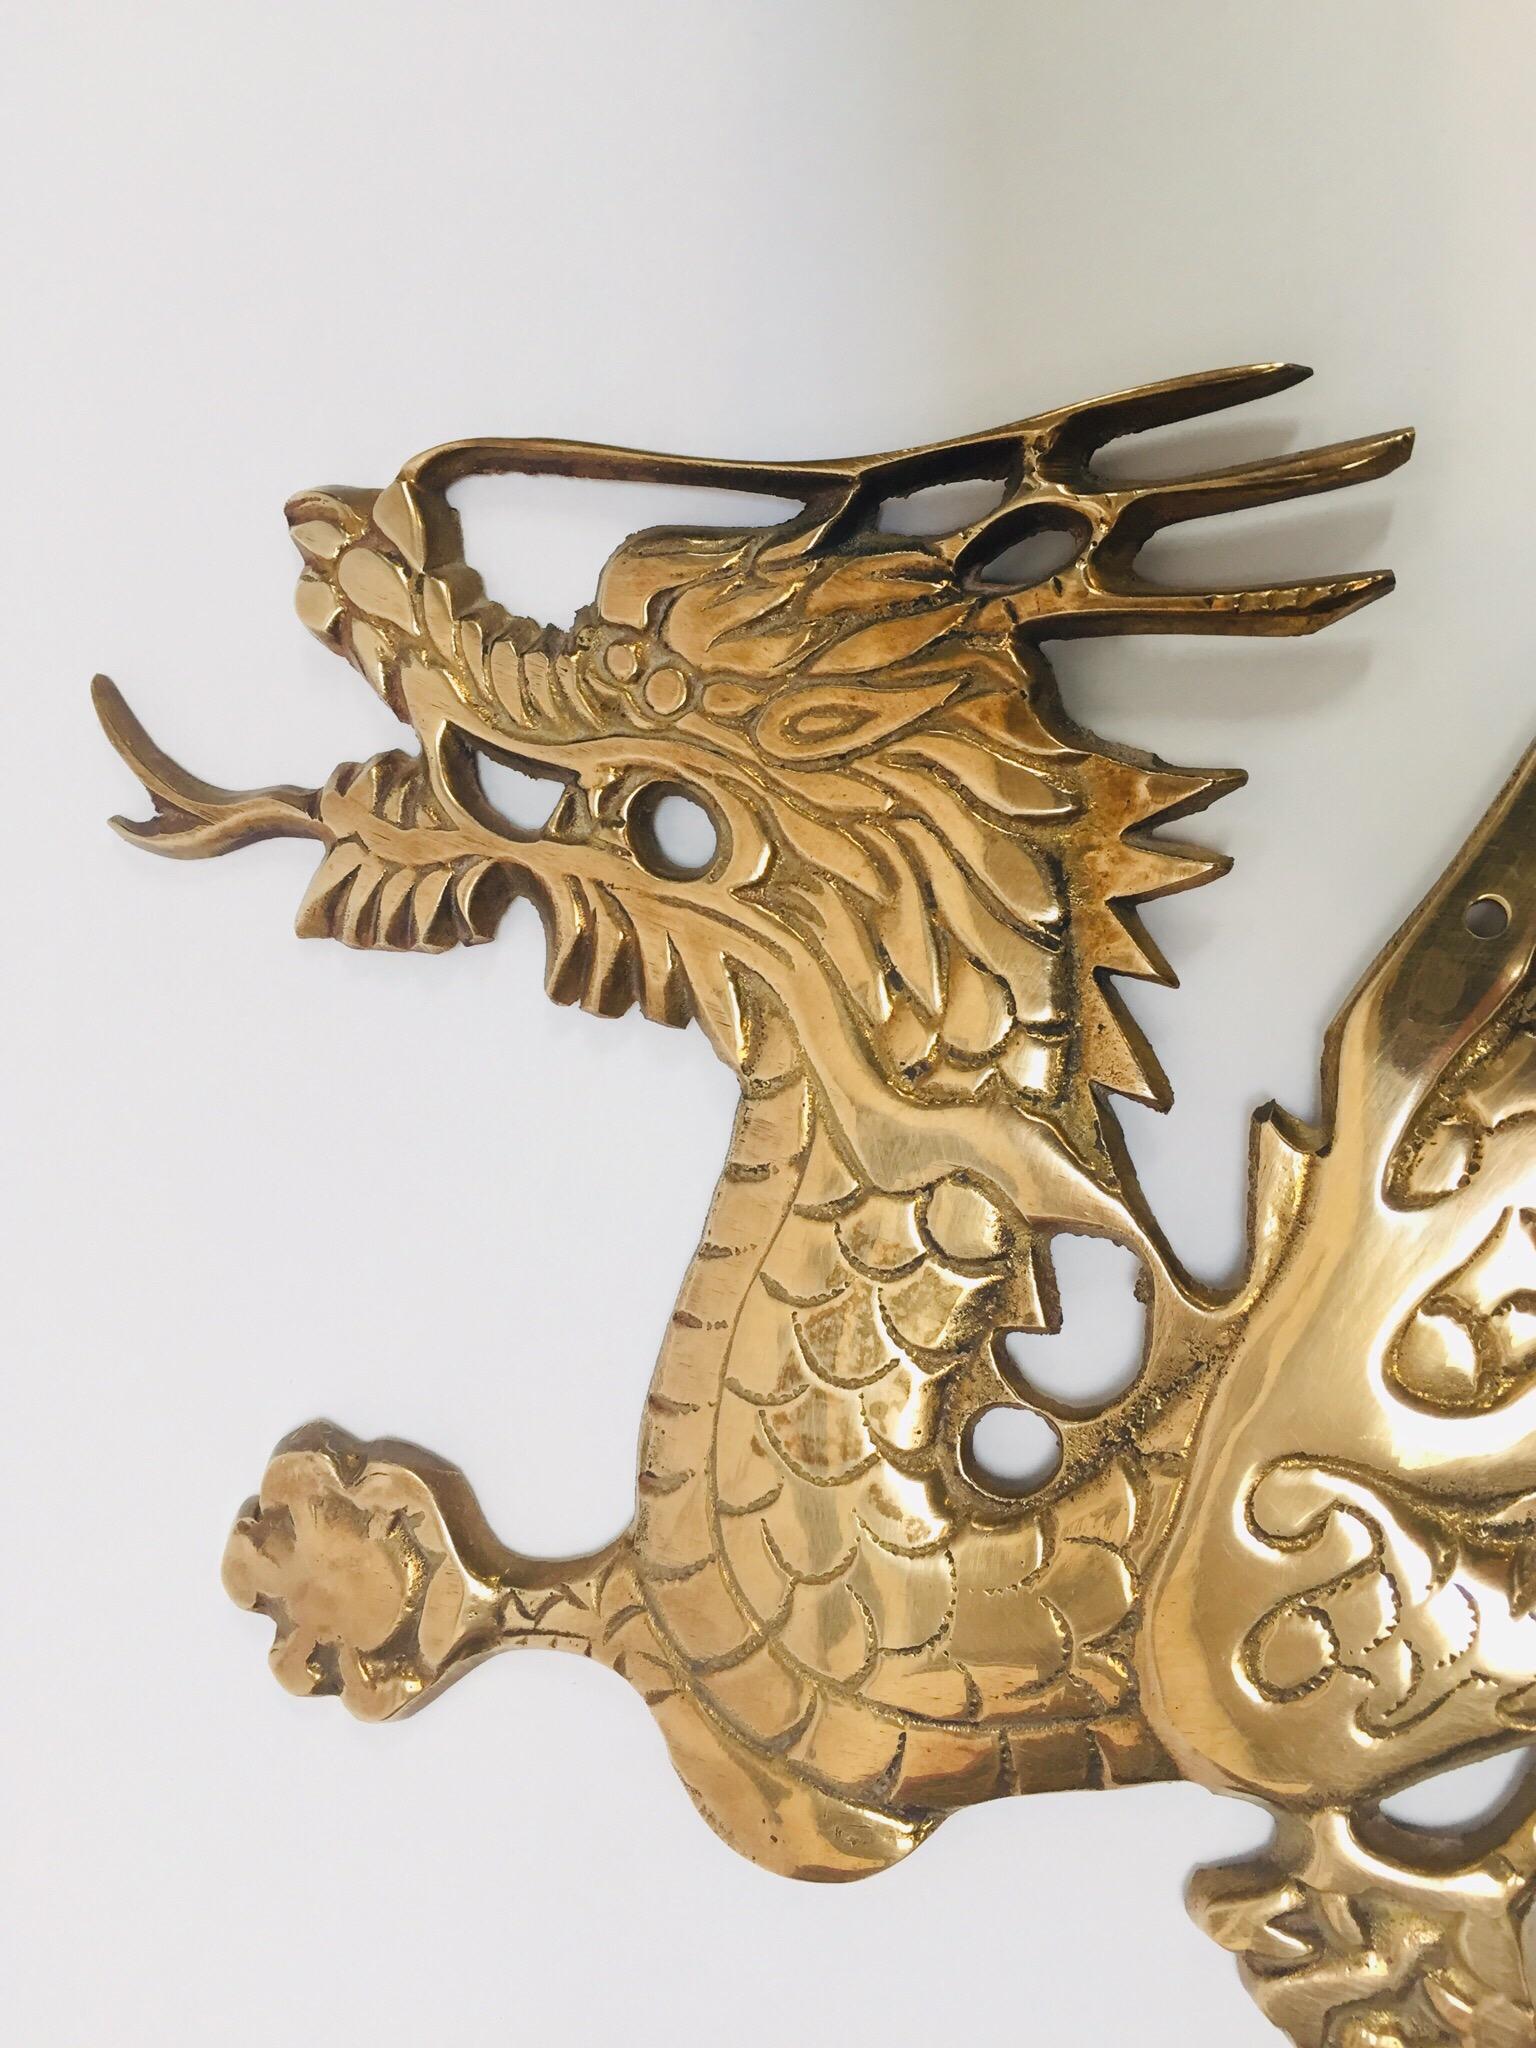 Wall mount, Asian cast brass dragon chasing a ball.
Wall mount dragon chasing a ball is the auspicious scene of good luck, prosperity and wealth.
It is believed that displaying dragon statue at home/office can attract auspicious energy.
The ball